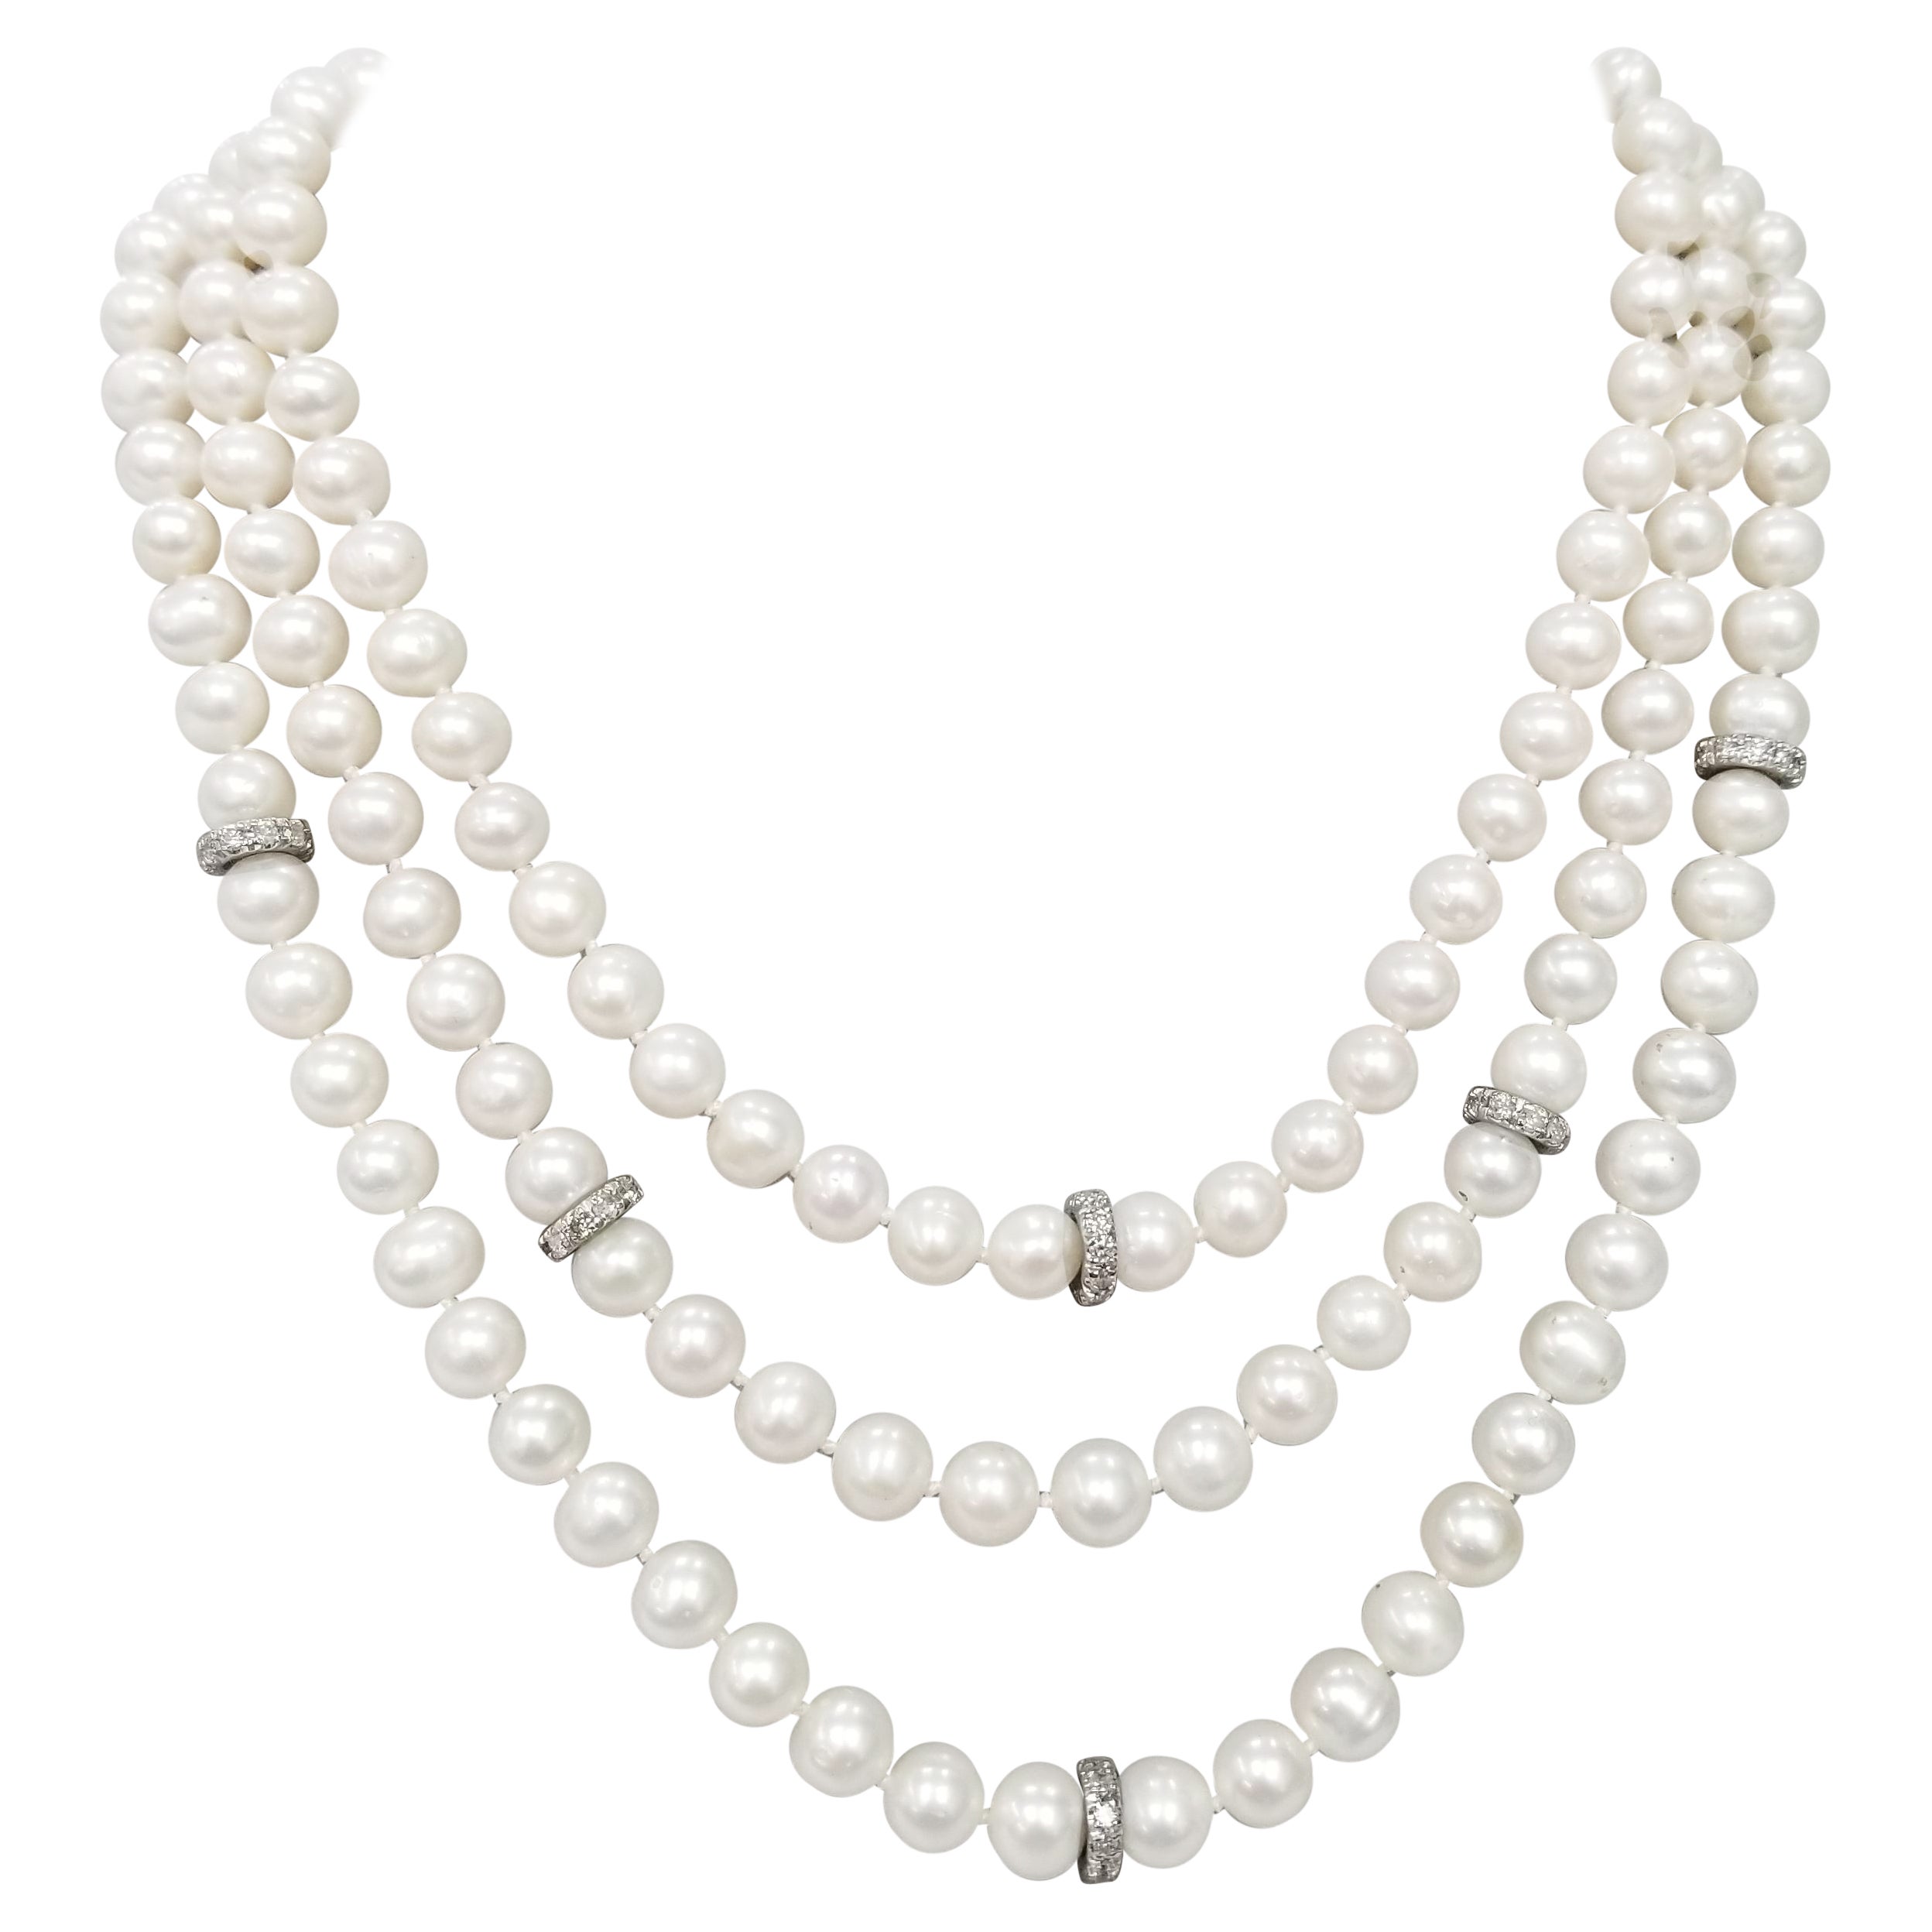 3 Strands of Fresh Water Cultured Pearls with 14k Diamond 2.16cts. Rondles